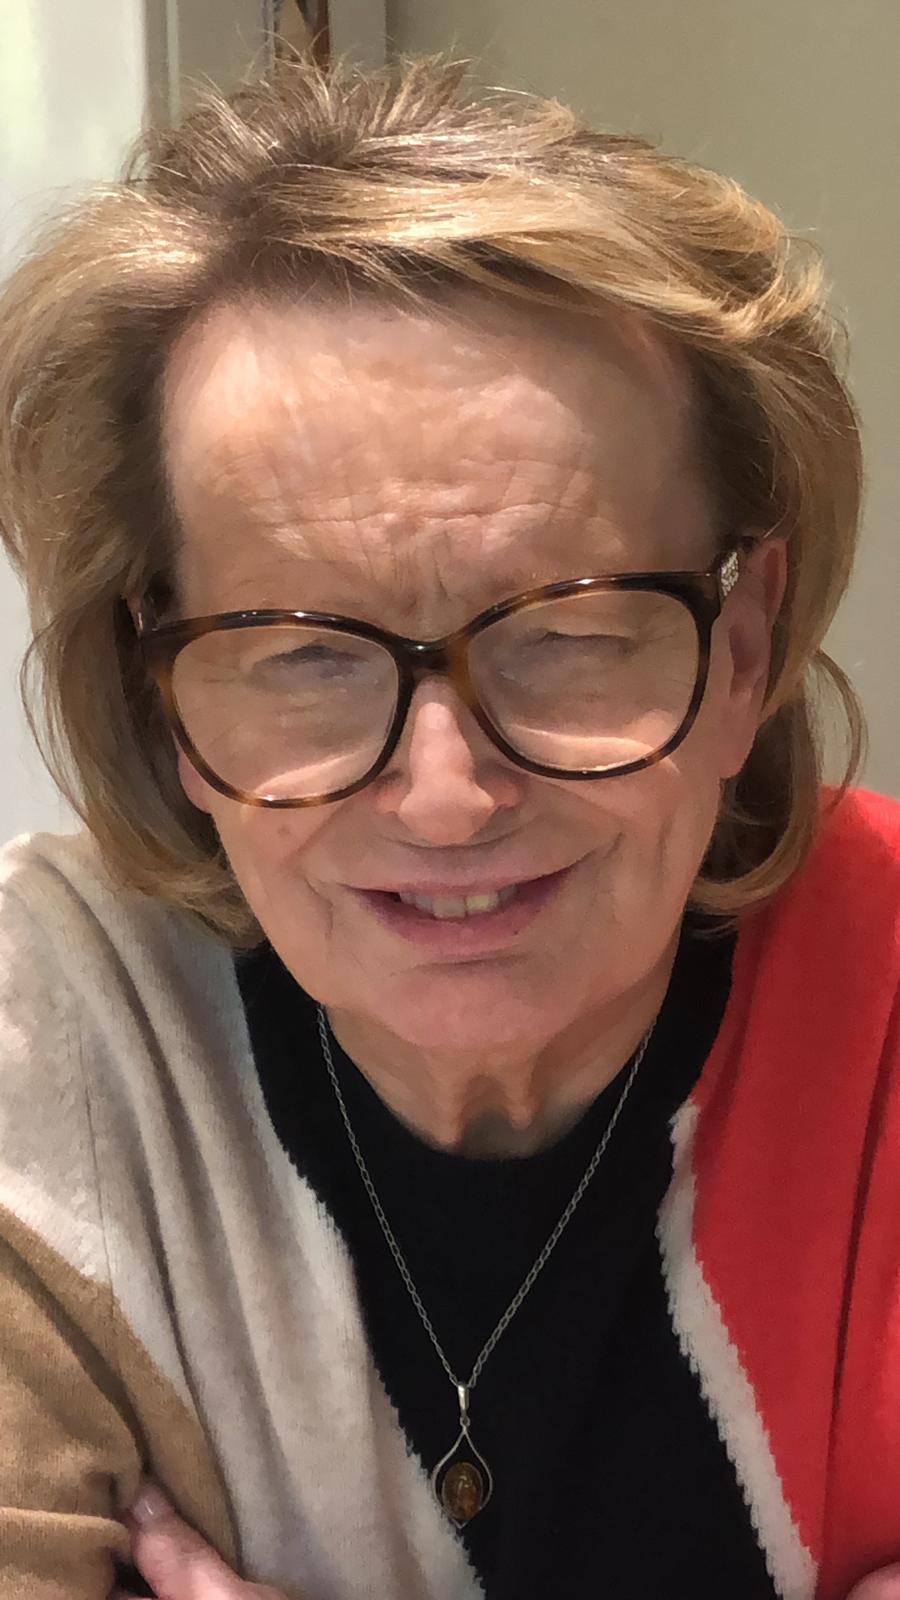 Image shows Birmingham SLC member, Val Griffiths, looking at the camera, smiling. She has light brown hair and is wearing glasses.